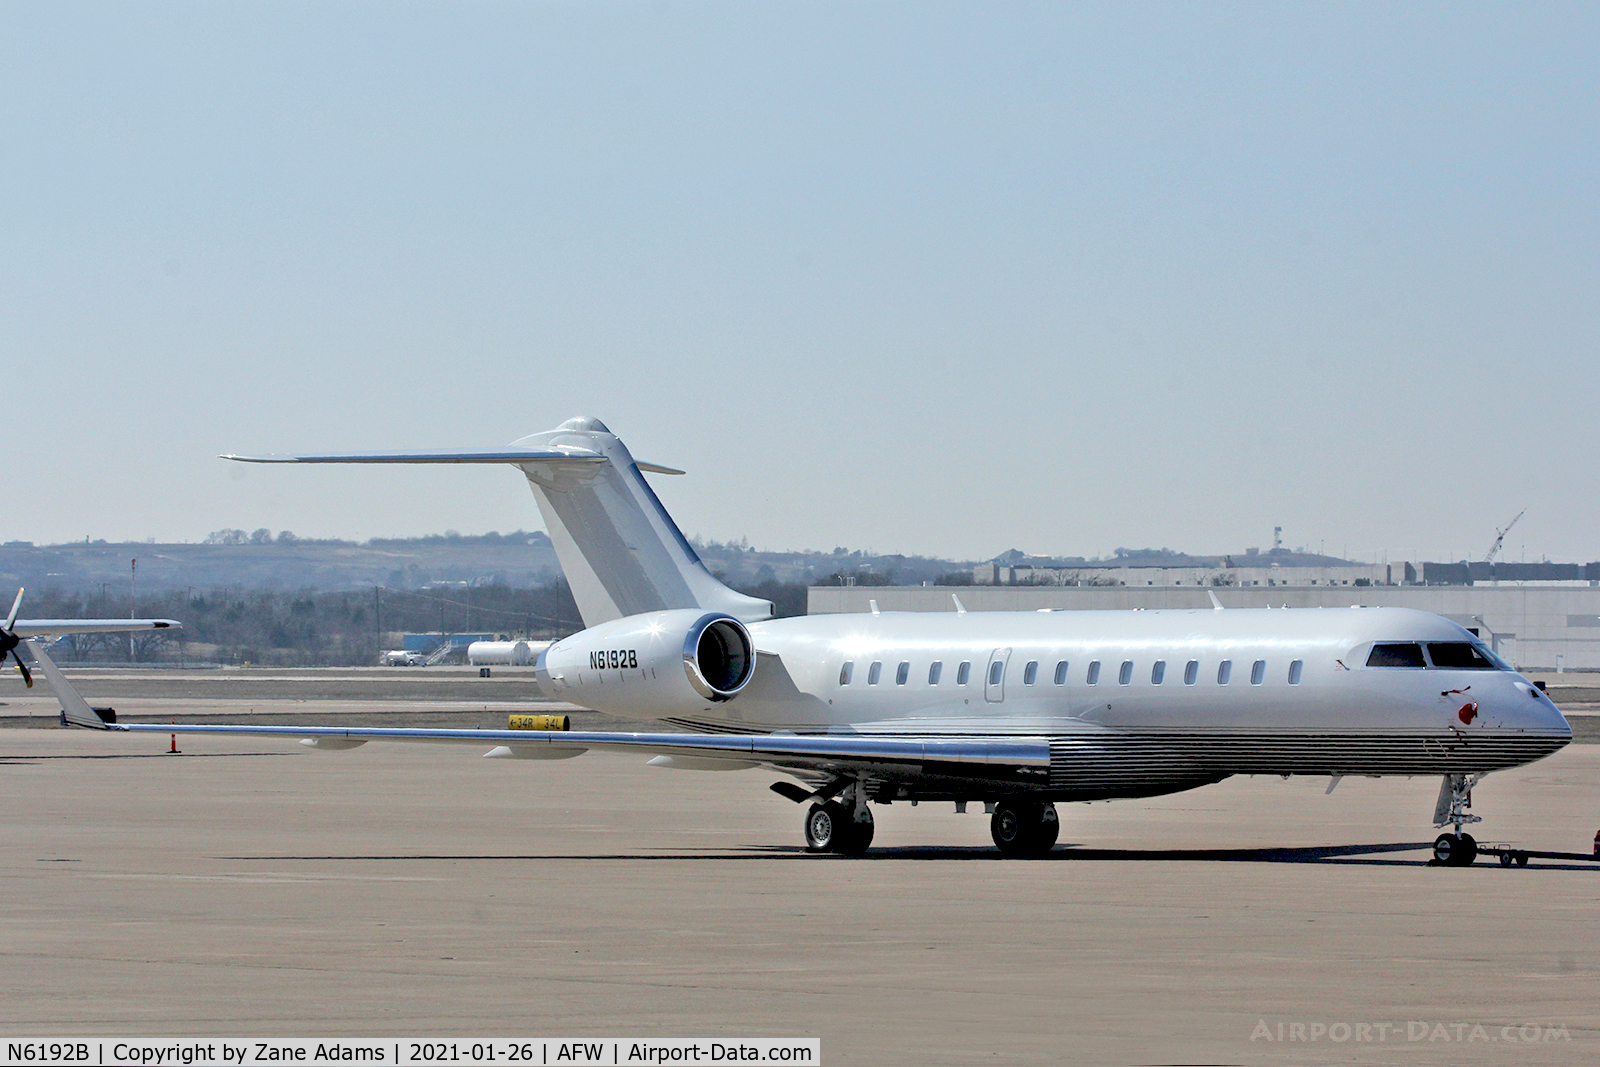 N6192B, 2015 Bombardier BD-700-1A10 Global 6000 C/N 9708, On the ramp at Alliance Airport - Fort Worth, TX